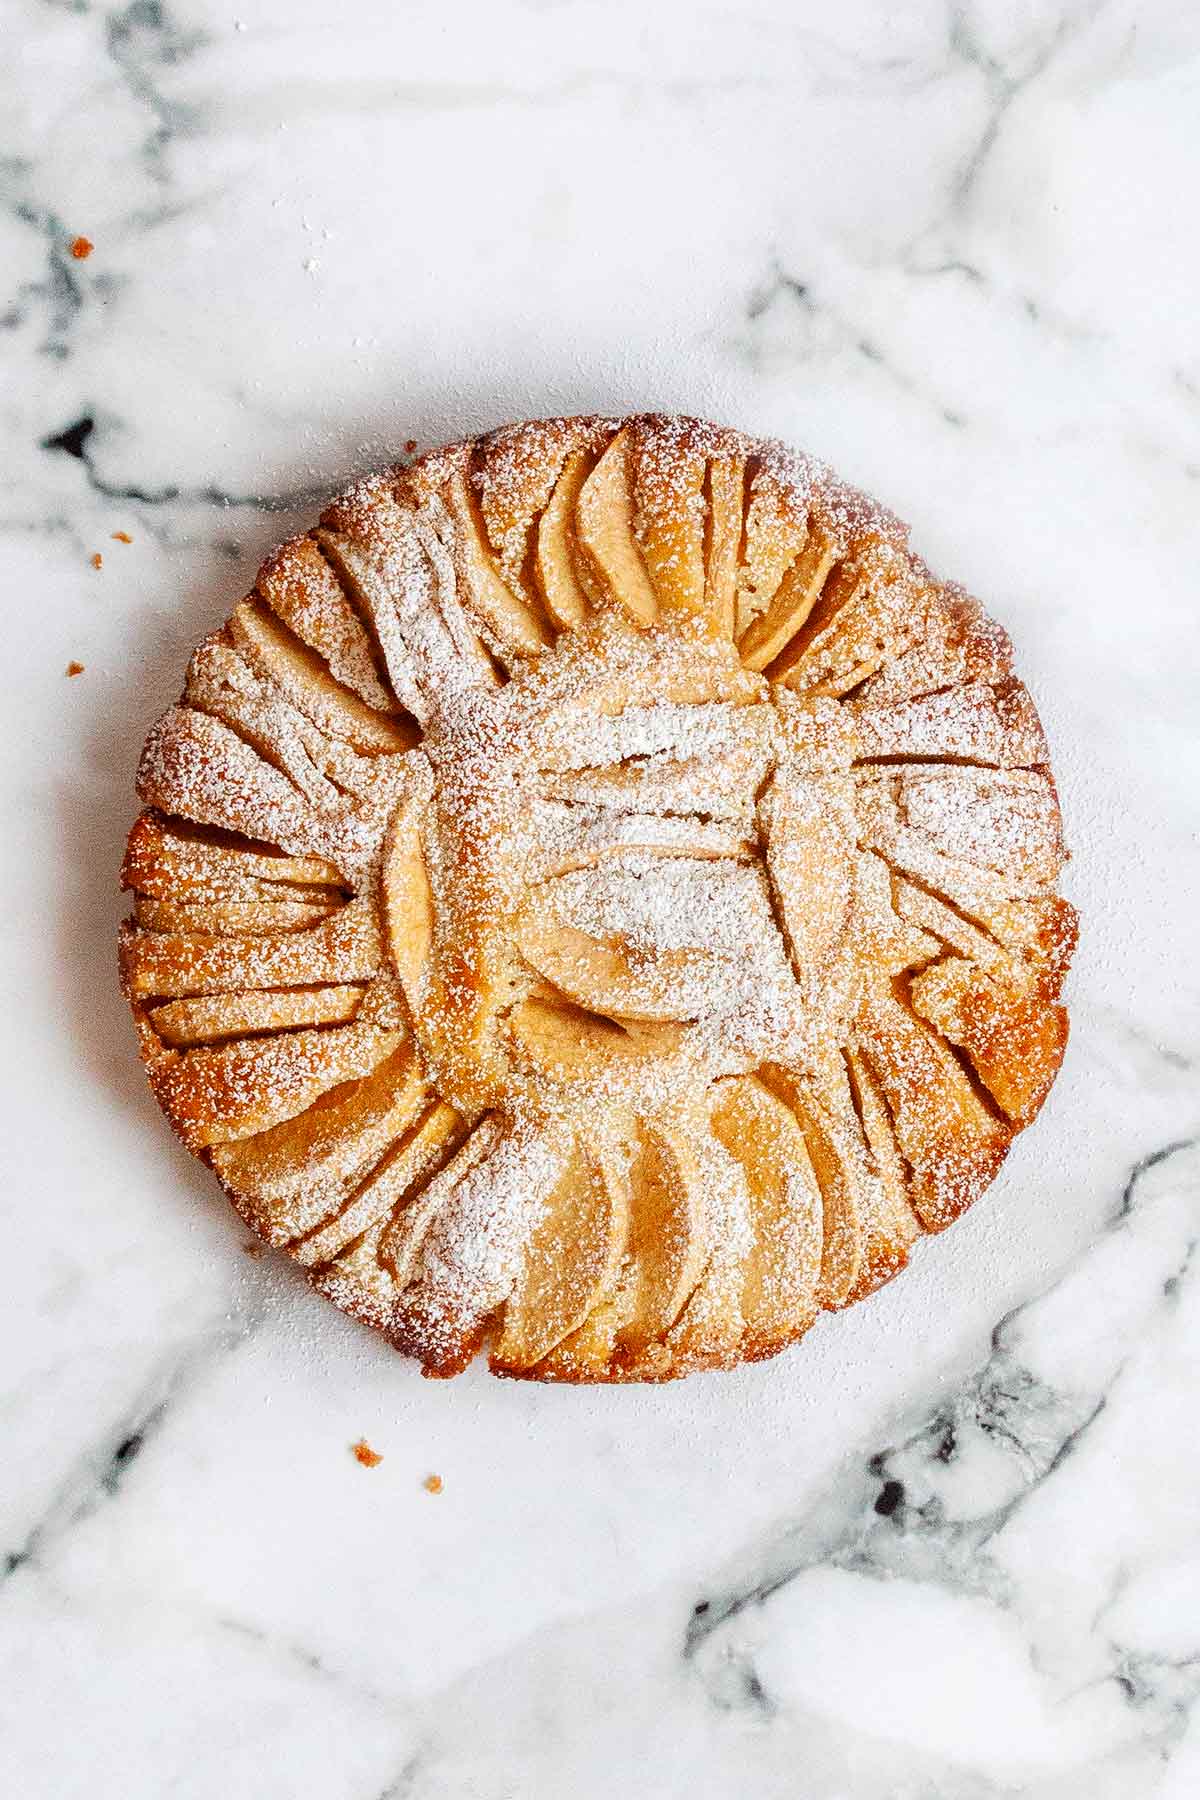 A whole apple cake dusted with confectioners' sugar.